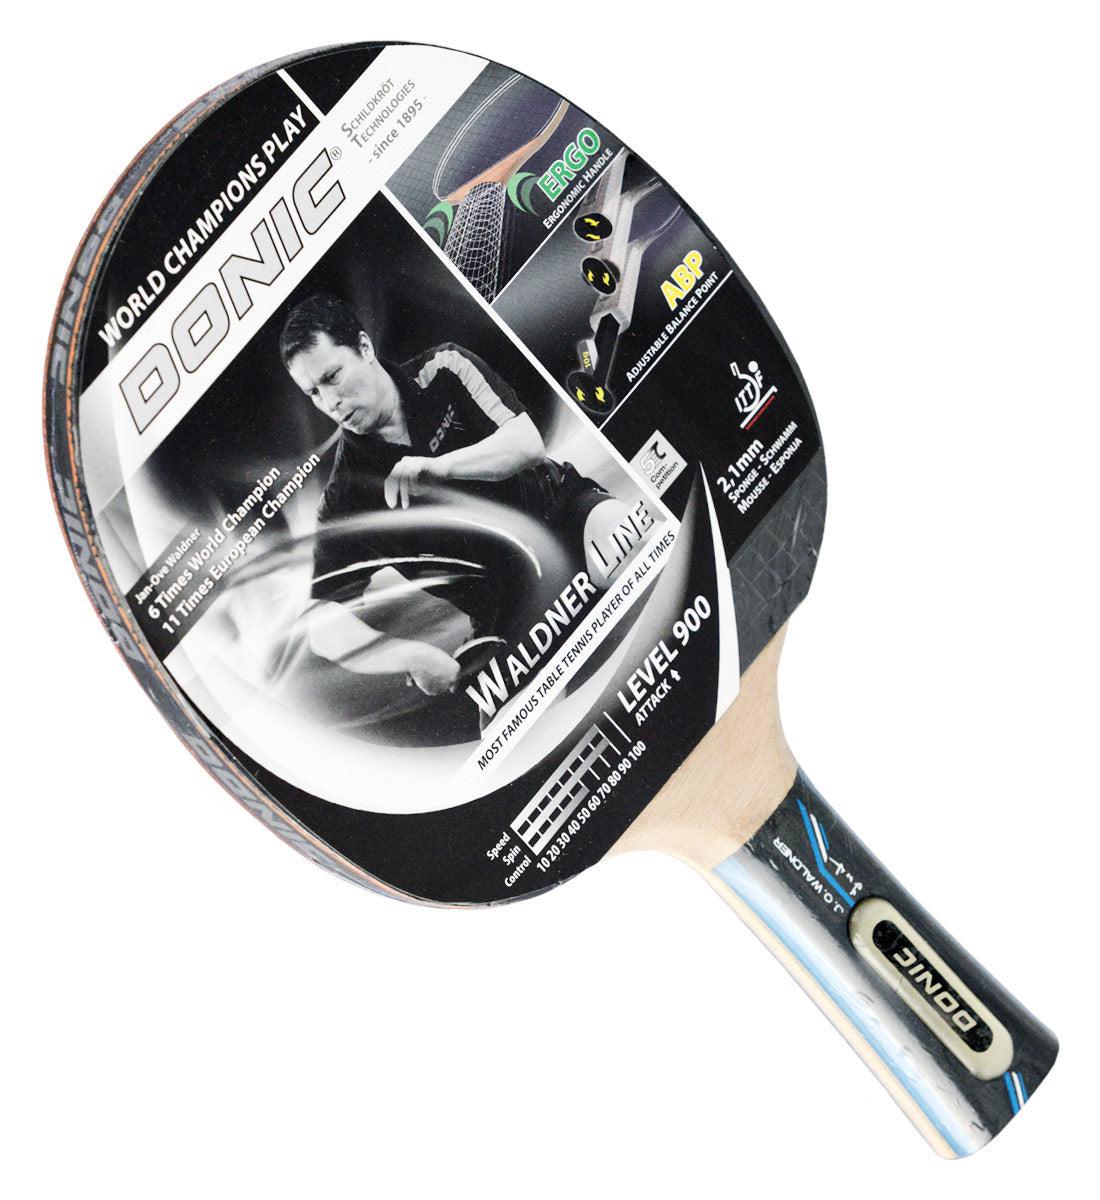 Donic Waldner 900 Table Tennis Racquet-Table Tennis Racquet-Pro Sports